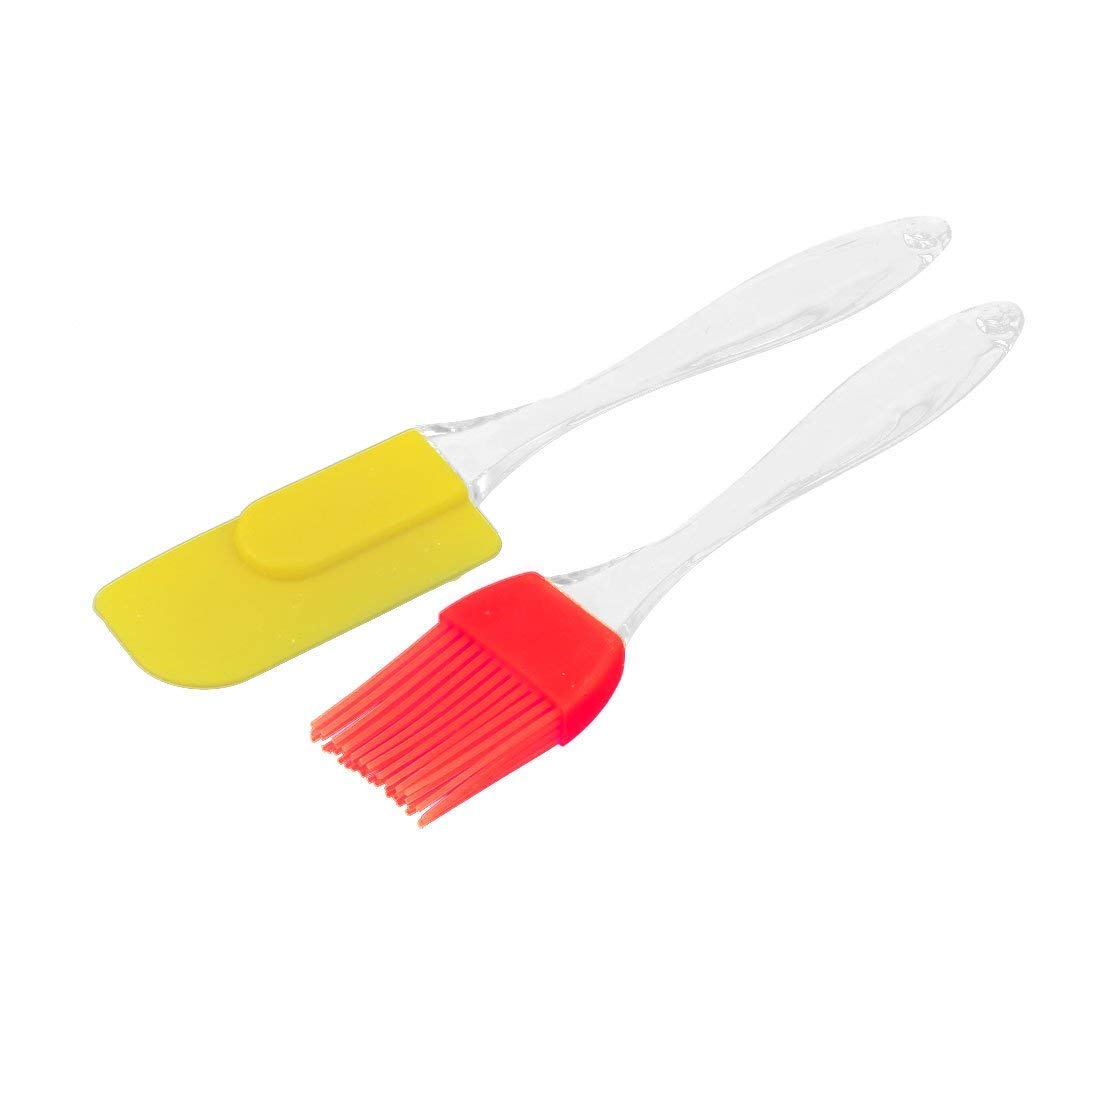 Silicone Spatula and Pastry Brush for Cake Mixer, Decorating, Cooking, Baking and Glazing(Multicolour, Standard Size)